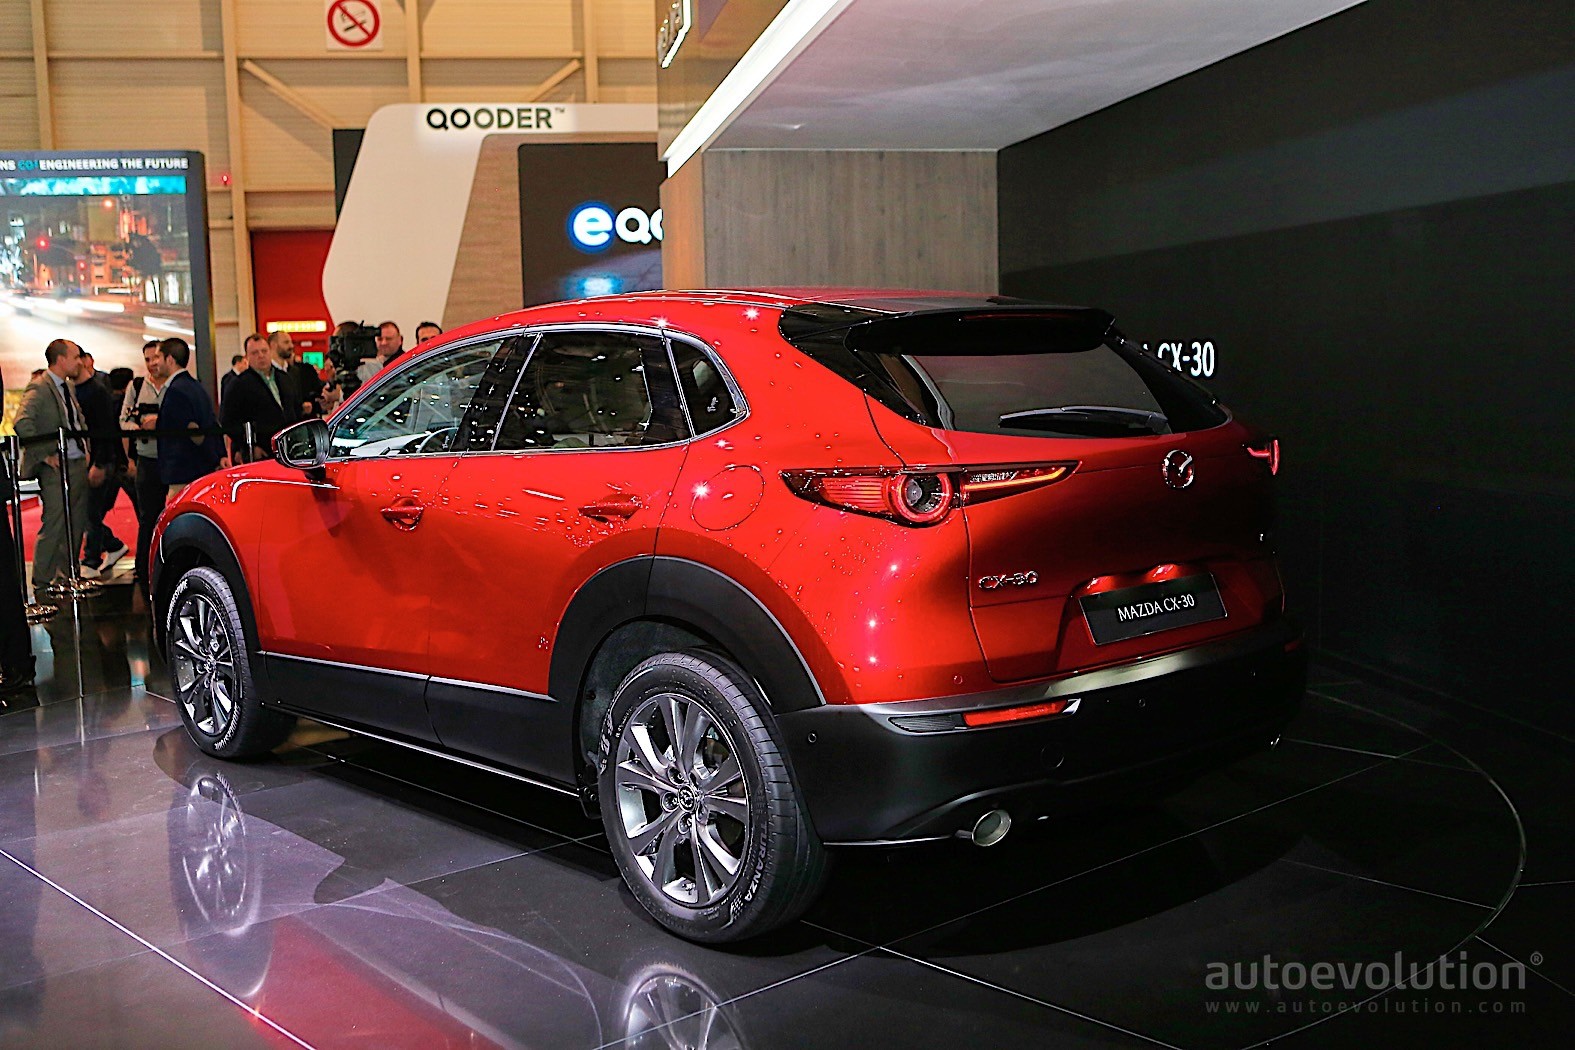 2020 Mazda CX-3 Comes In Just One But Fully Loaded Trim Priced From $21,685